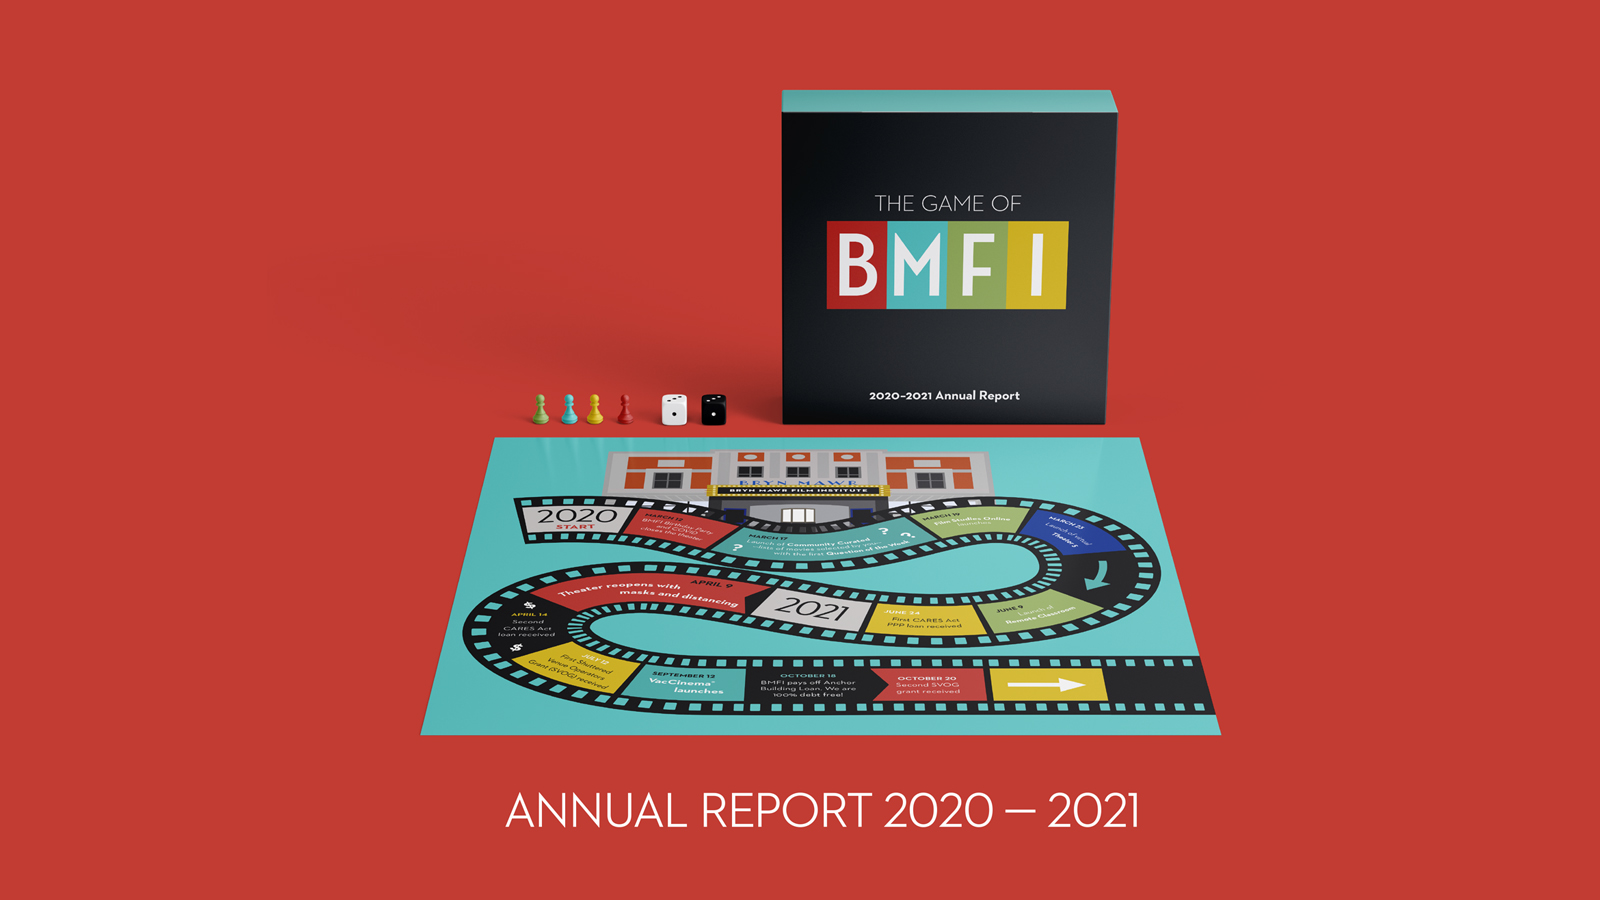 cover of the 2020 - 2021 Annual Report showing a board game called the Game of BMFI